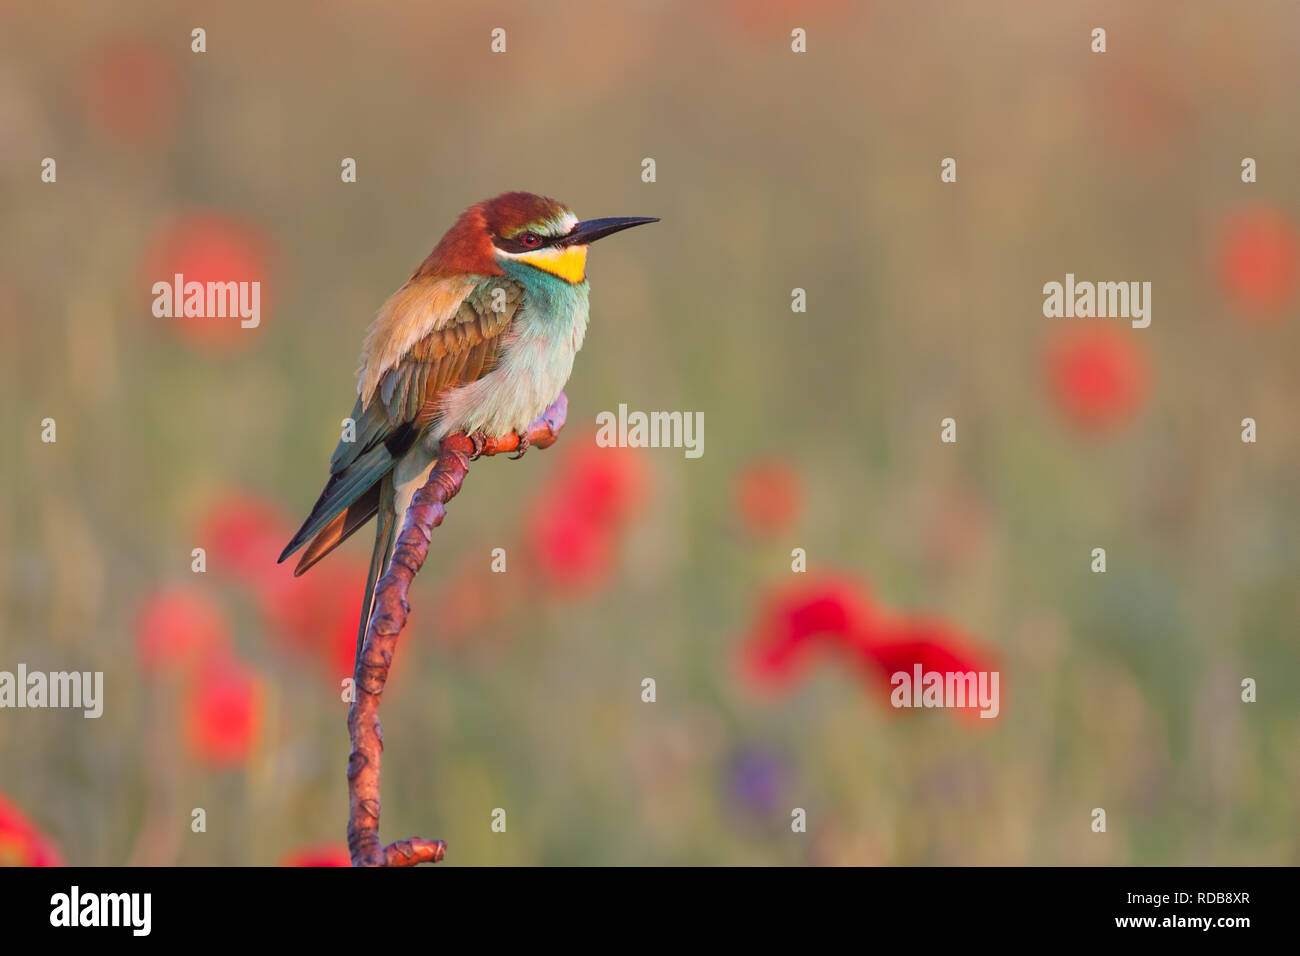 European bee-eater, merops apiaster, perched near poppy flowers. Stock Photo